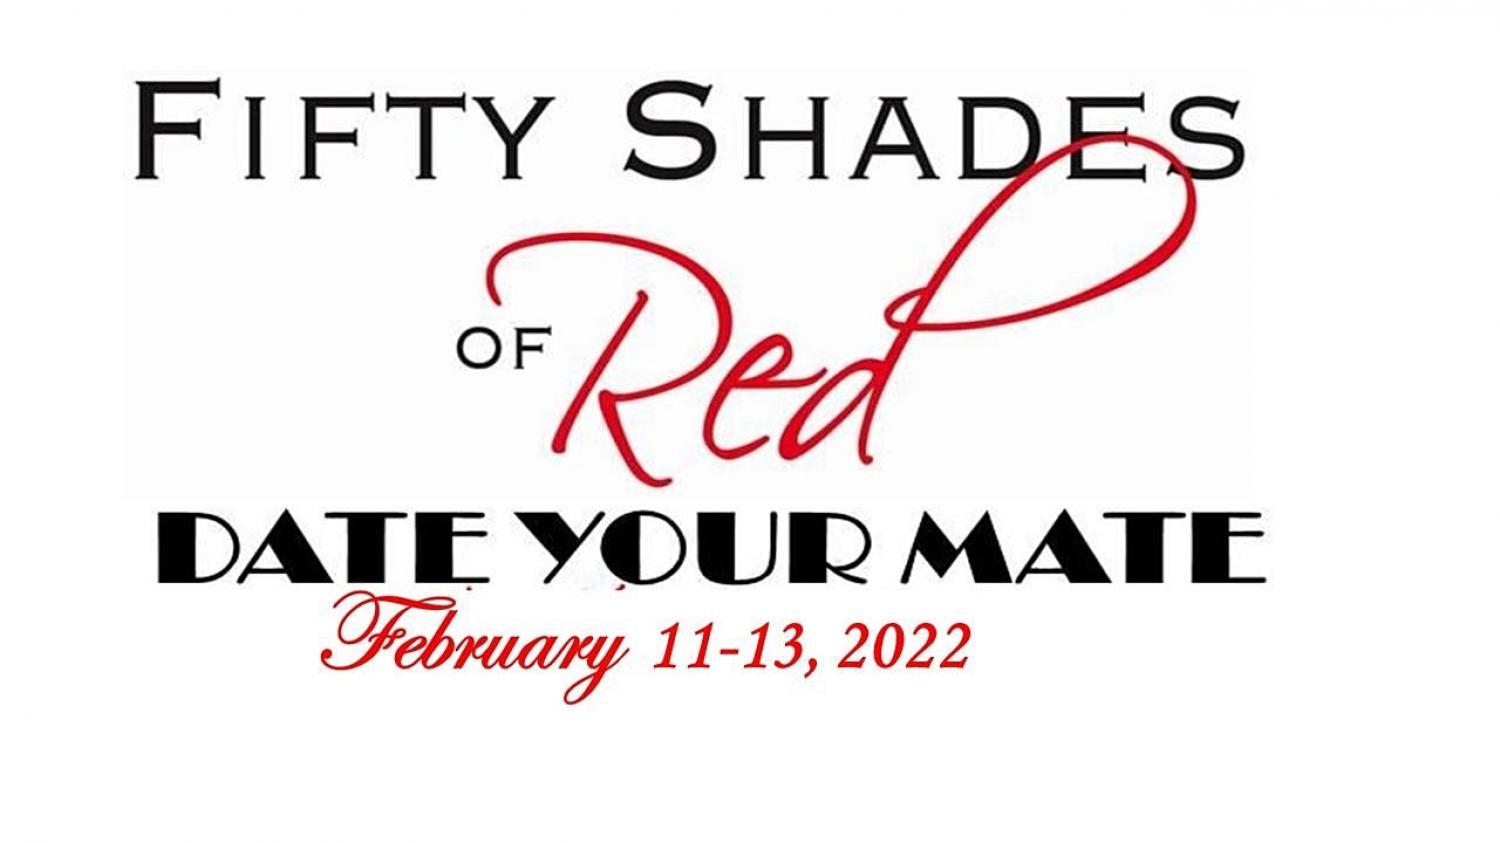 50 Shades of Red: VALENTINES Marriage Retreat